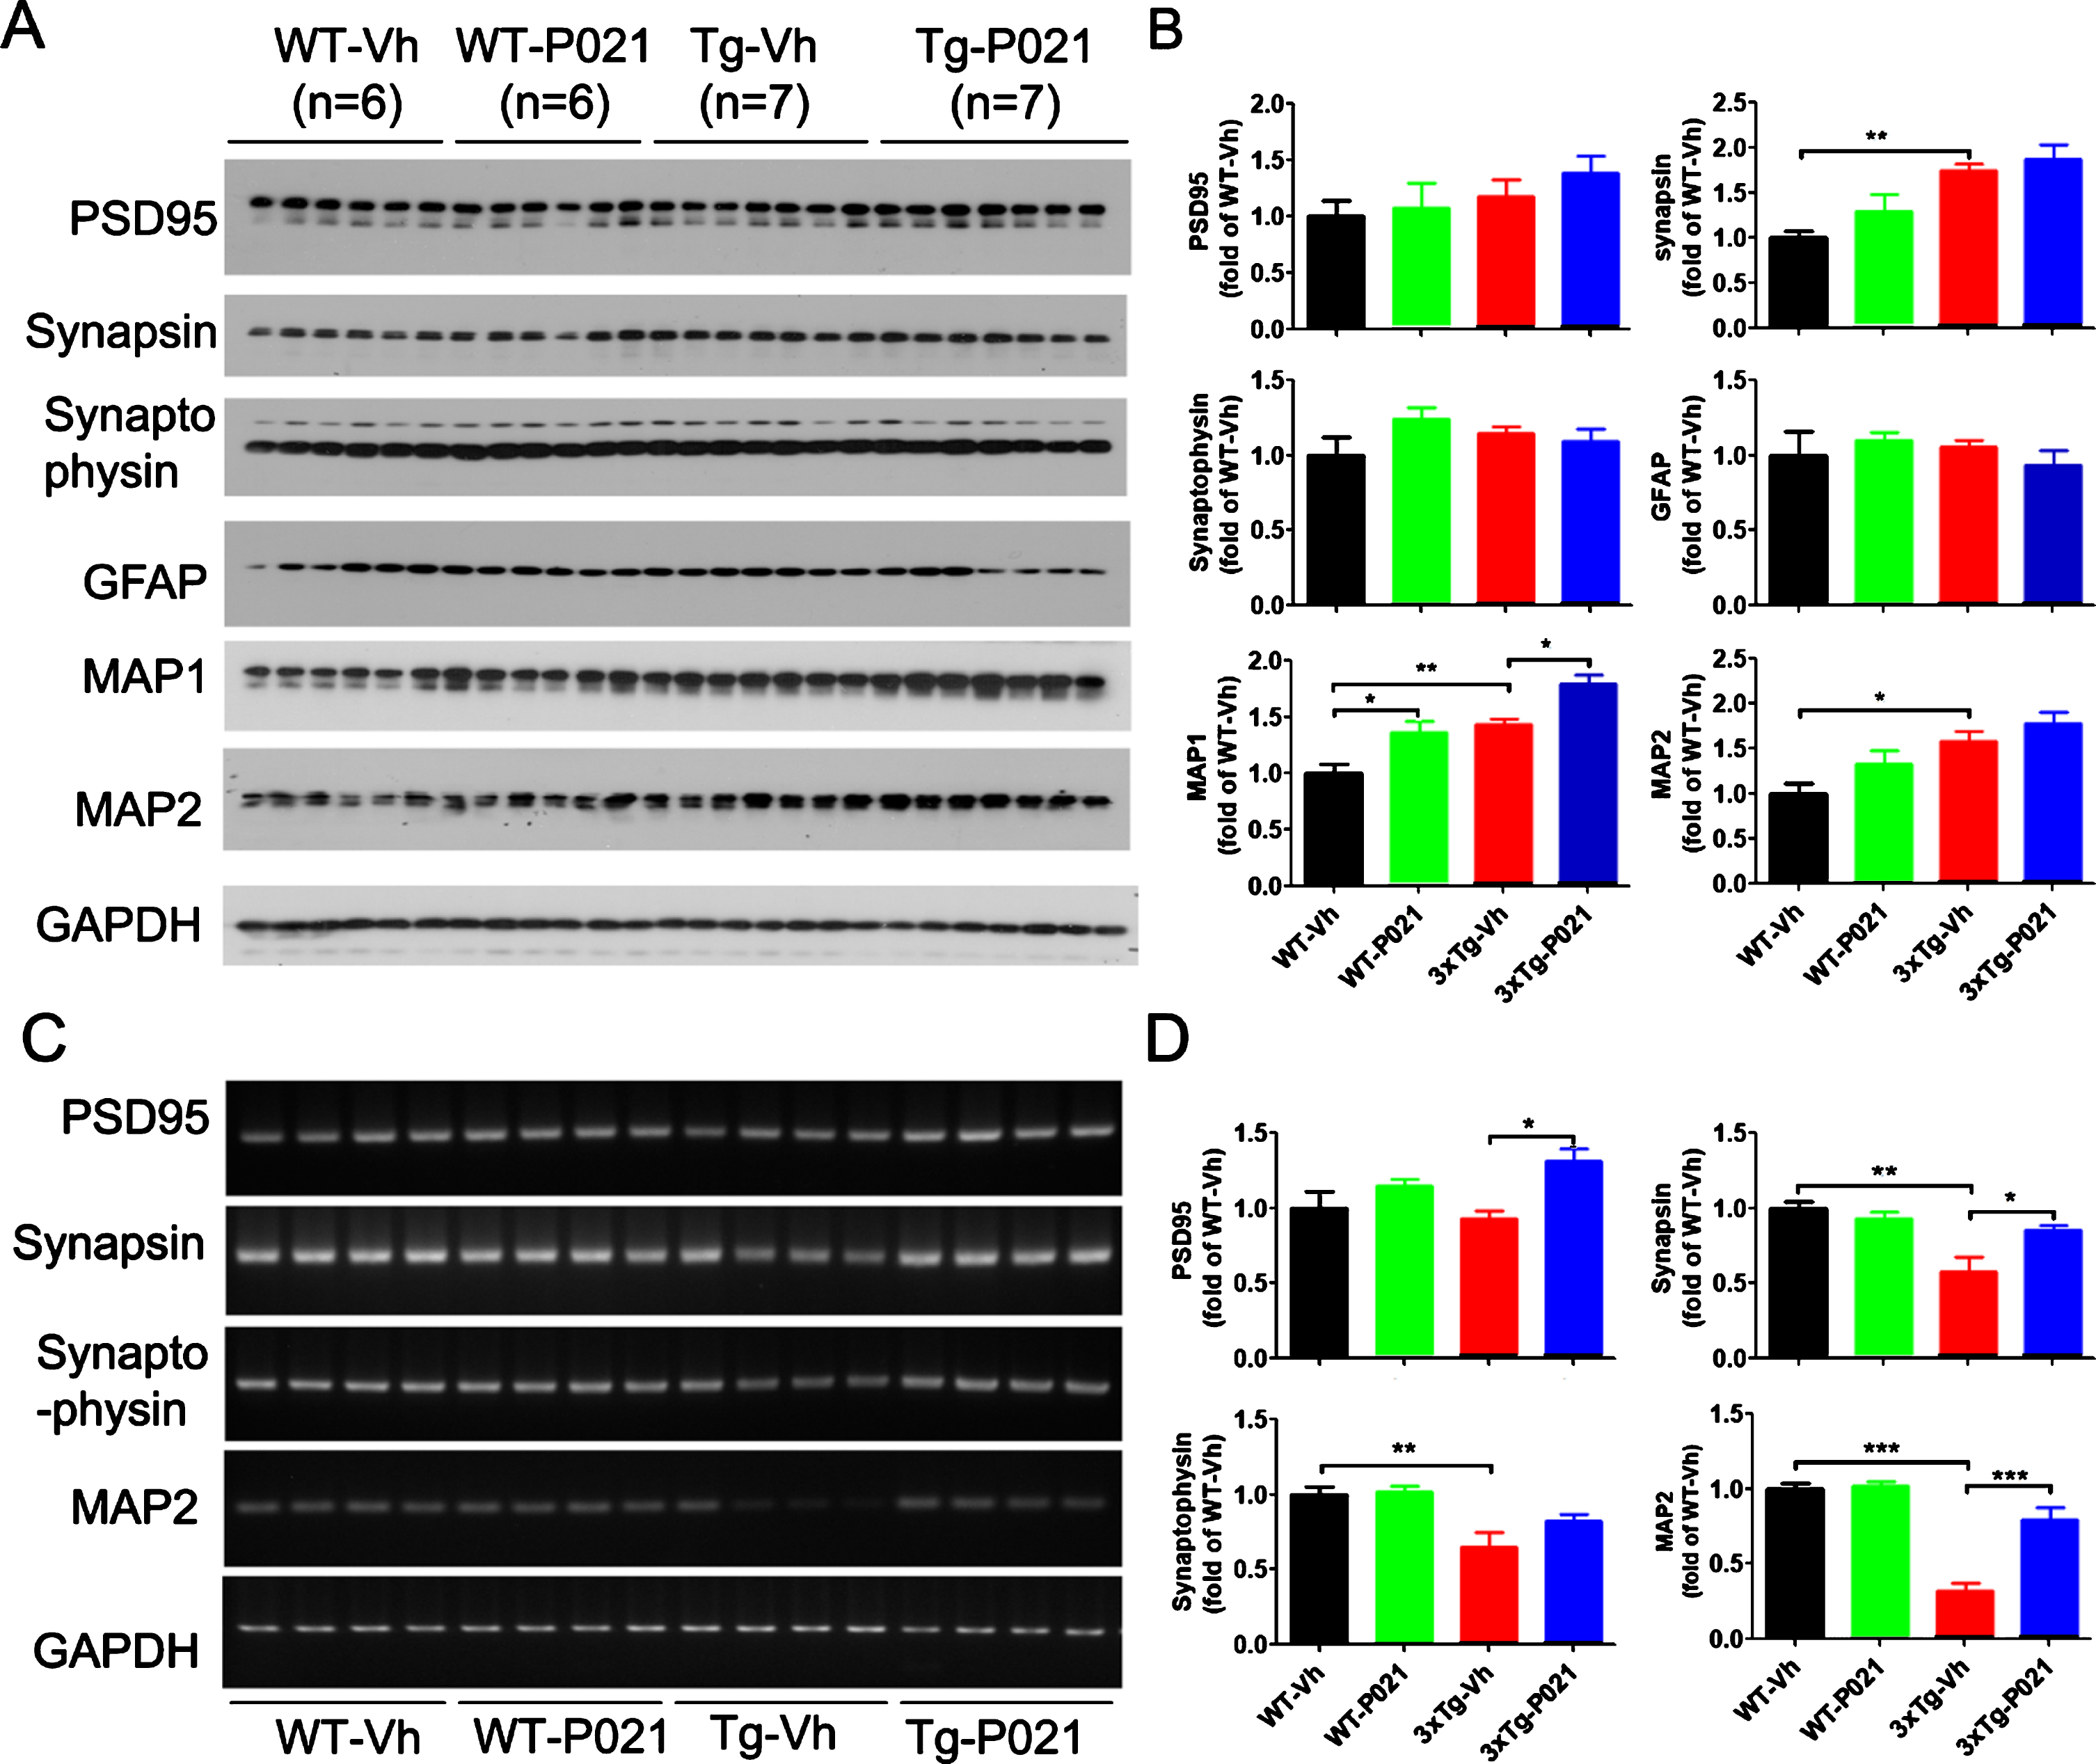 P021 treatment rescues dendritic and synaptic deficits in 3×Tg-AD mice. Protein levels in cortex (A) and the mRNA levels in hippocampus (C) were analyzed. Densitometric quantifications of western blots (B) and RT-PCR (D) were normalized against the loading control GAPDH. 3xTg-Vh mice showed increase of protein expressions of synapsin, MAP1, and MAP2, while MAP1 was further increased by P021 treatment (p = 0.0117) (A, B). The mRNA levels (C, D) of synapsin, synaptophysin, MAP1, and MAP2 were decreased, and treatment with P021 rescued the levels of PDS95 (p = 0.0167), synapsin (p = 0.0374), and MAP2 (p = 0.0003) in 3xTg-AD mice. Data were analyzed by two-way ANOVA followed by a Tukey’s multiple comparisons test and are expressed as mean±S.E.M. n = 4. *p < 0.05, **p < 0.01, ***p < 0.001.